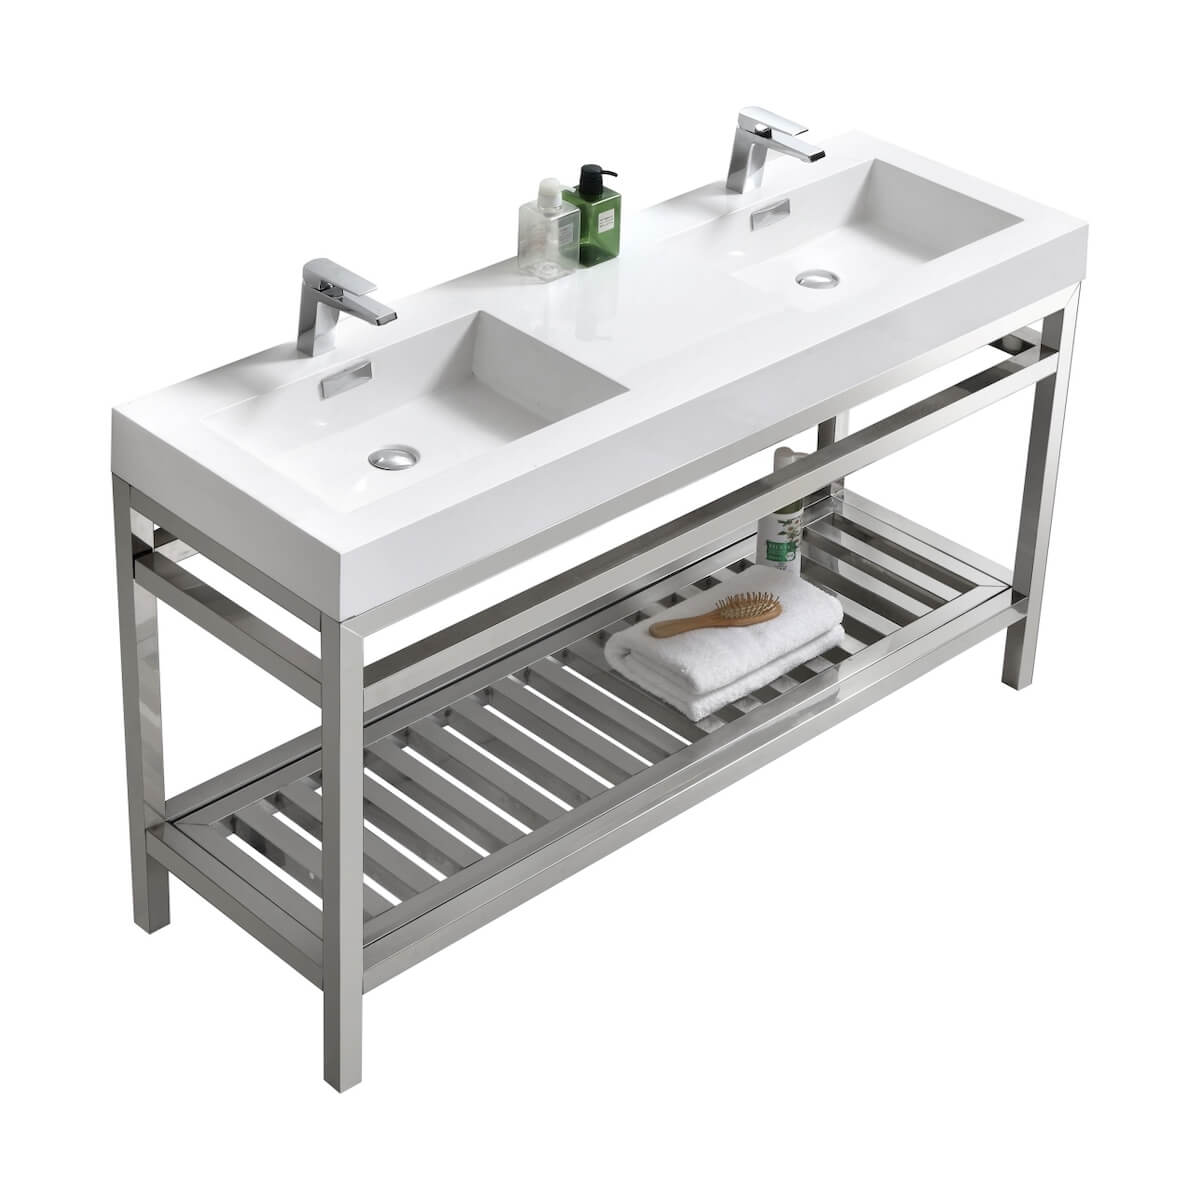 KubeBath Cisco 60” Chrome Stainless Steel Double Sink Console Vanity with Acrylic Sink AC60D